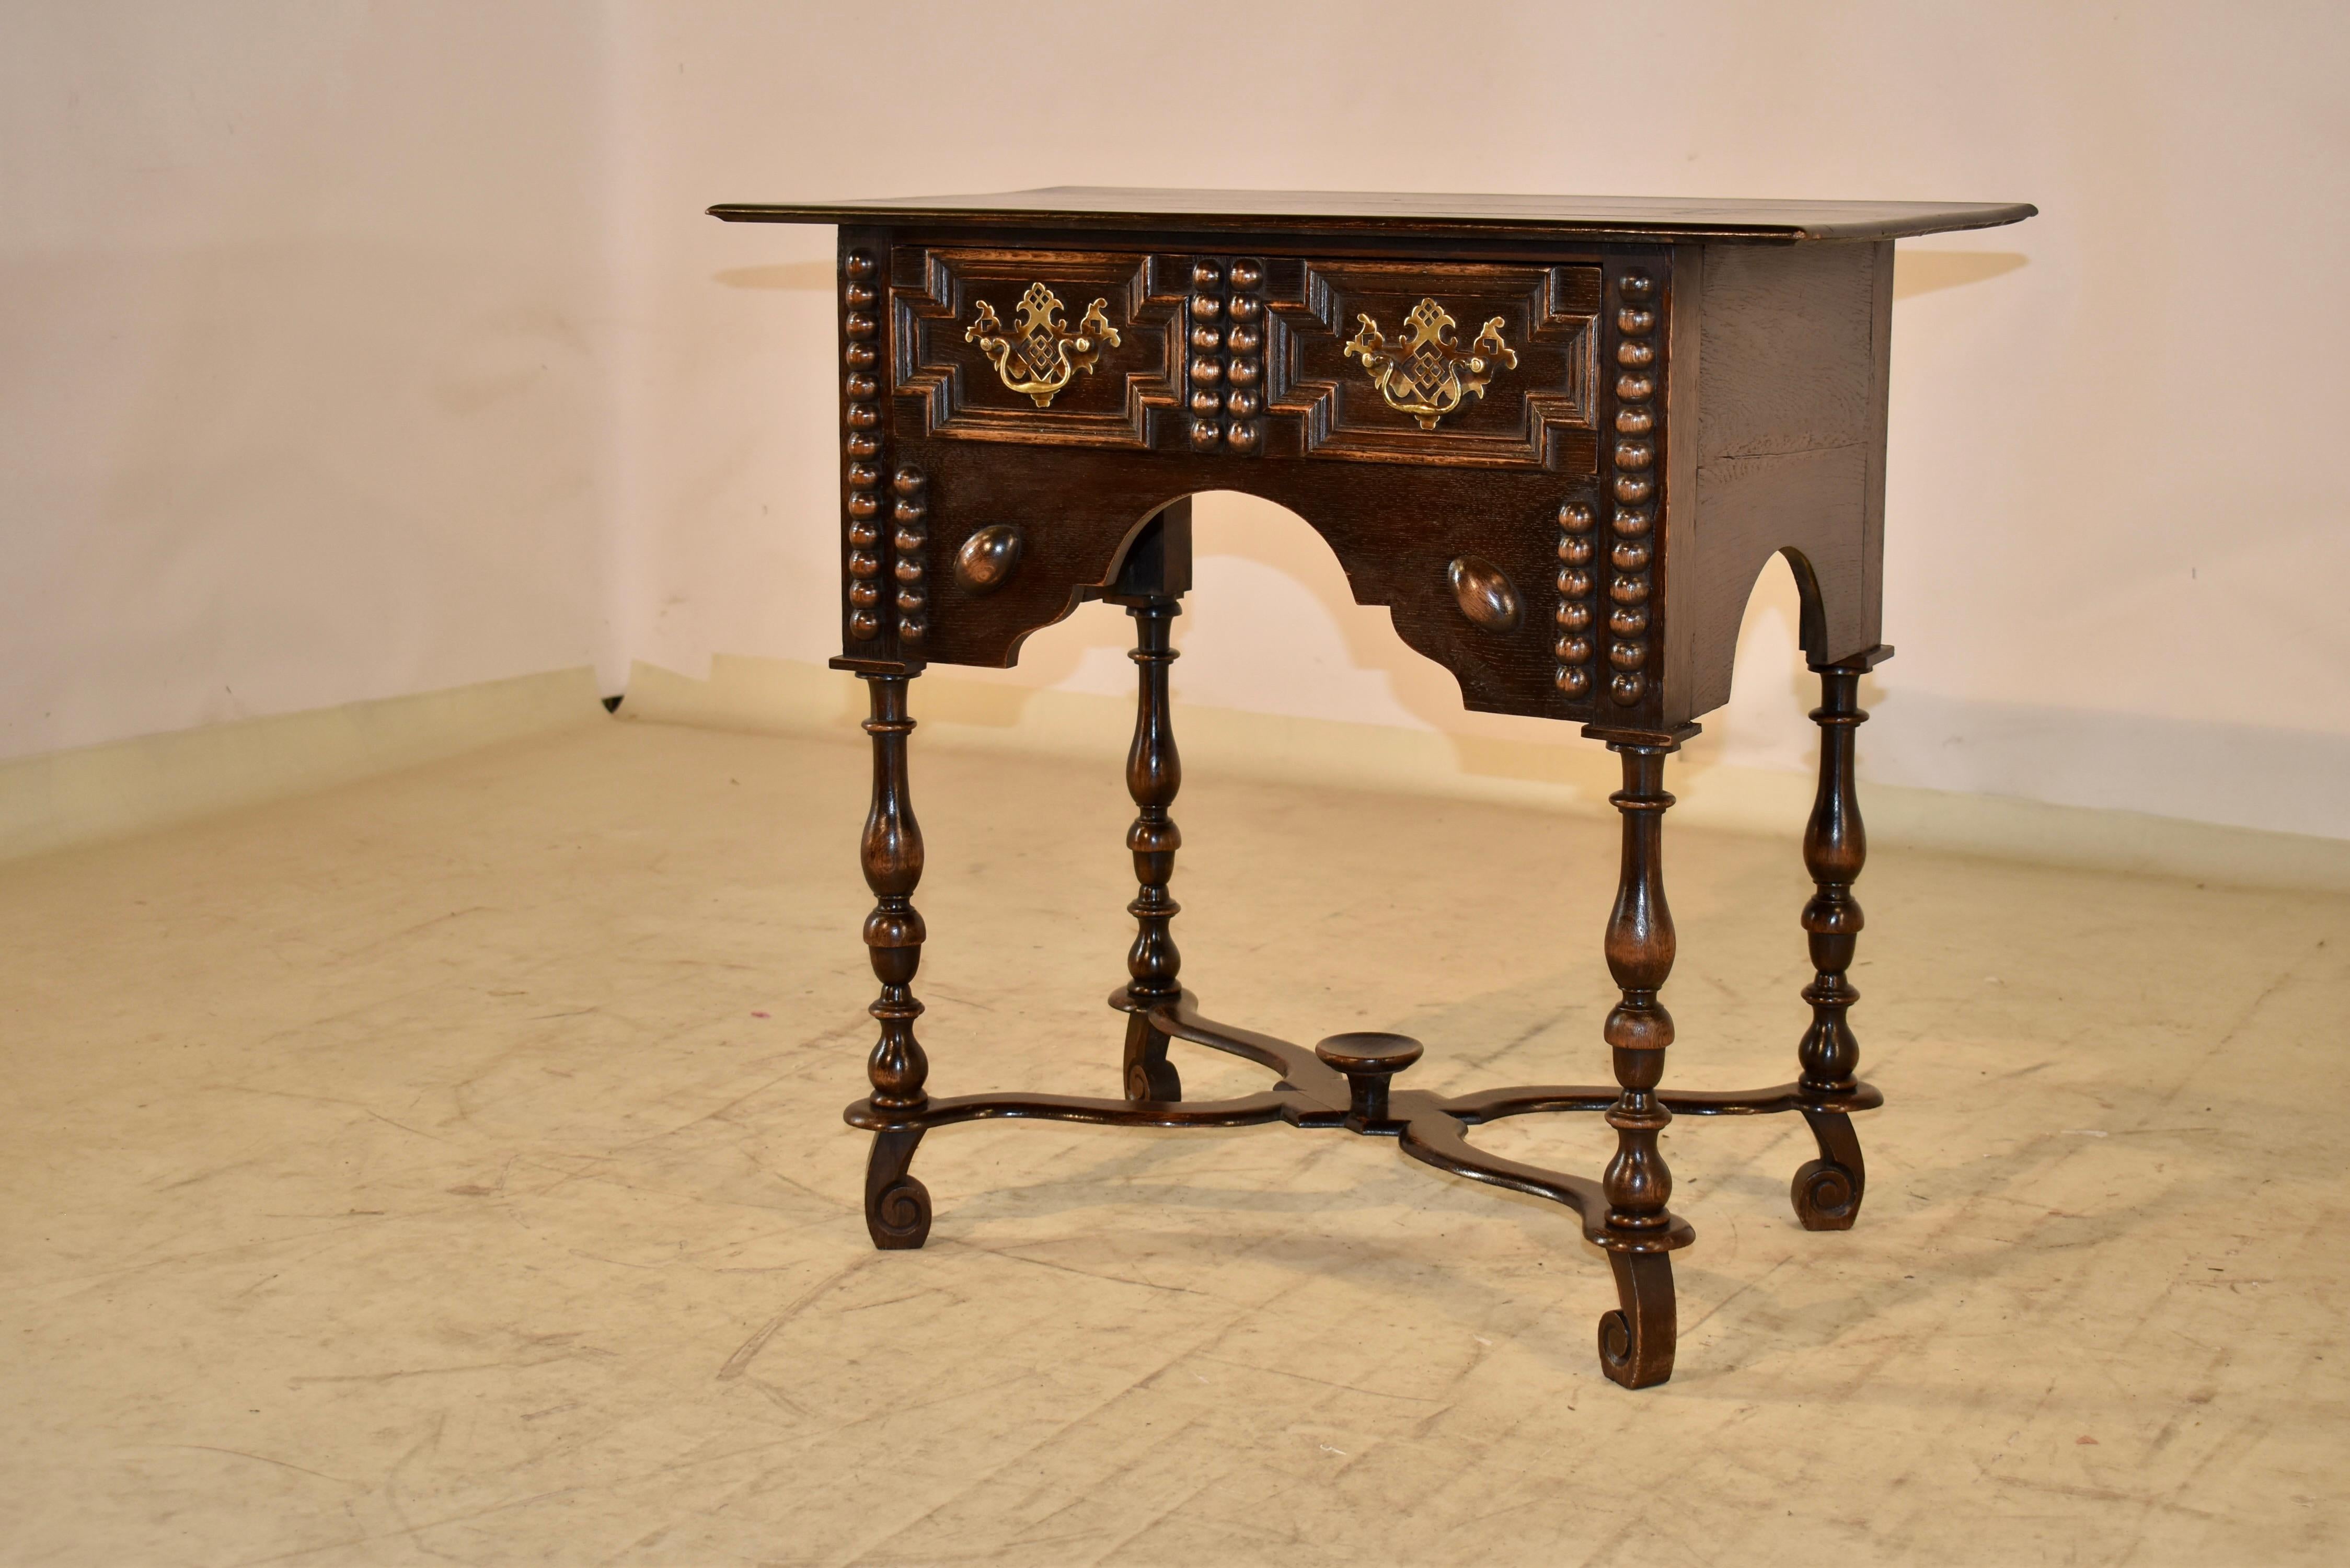 19th century Oak side table from England with a simple edge around the top, following down to simple sides and a single drawer in the front. The drawer front has raised decorative paneling and applied beaded decoration, and is flanked by additional